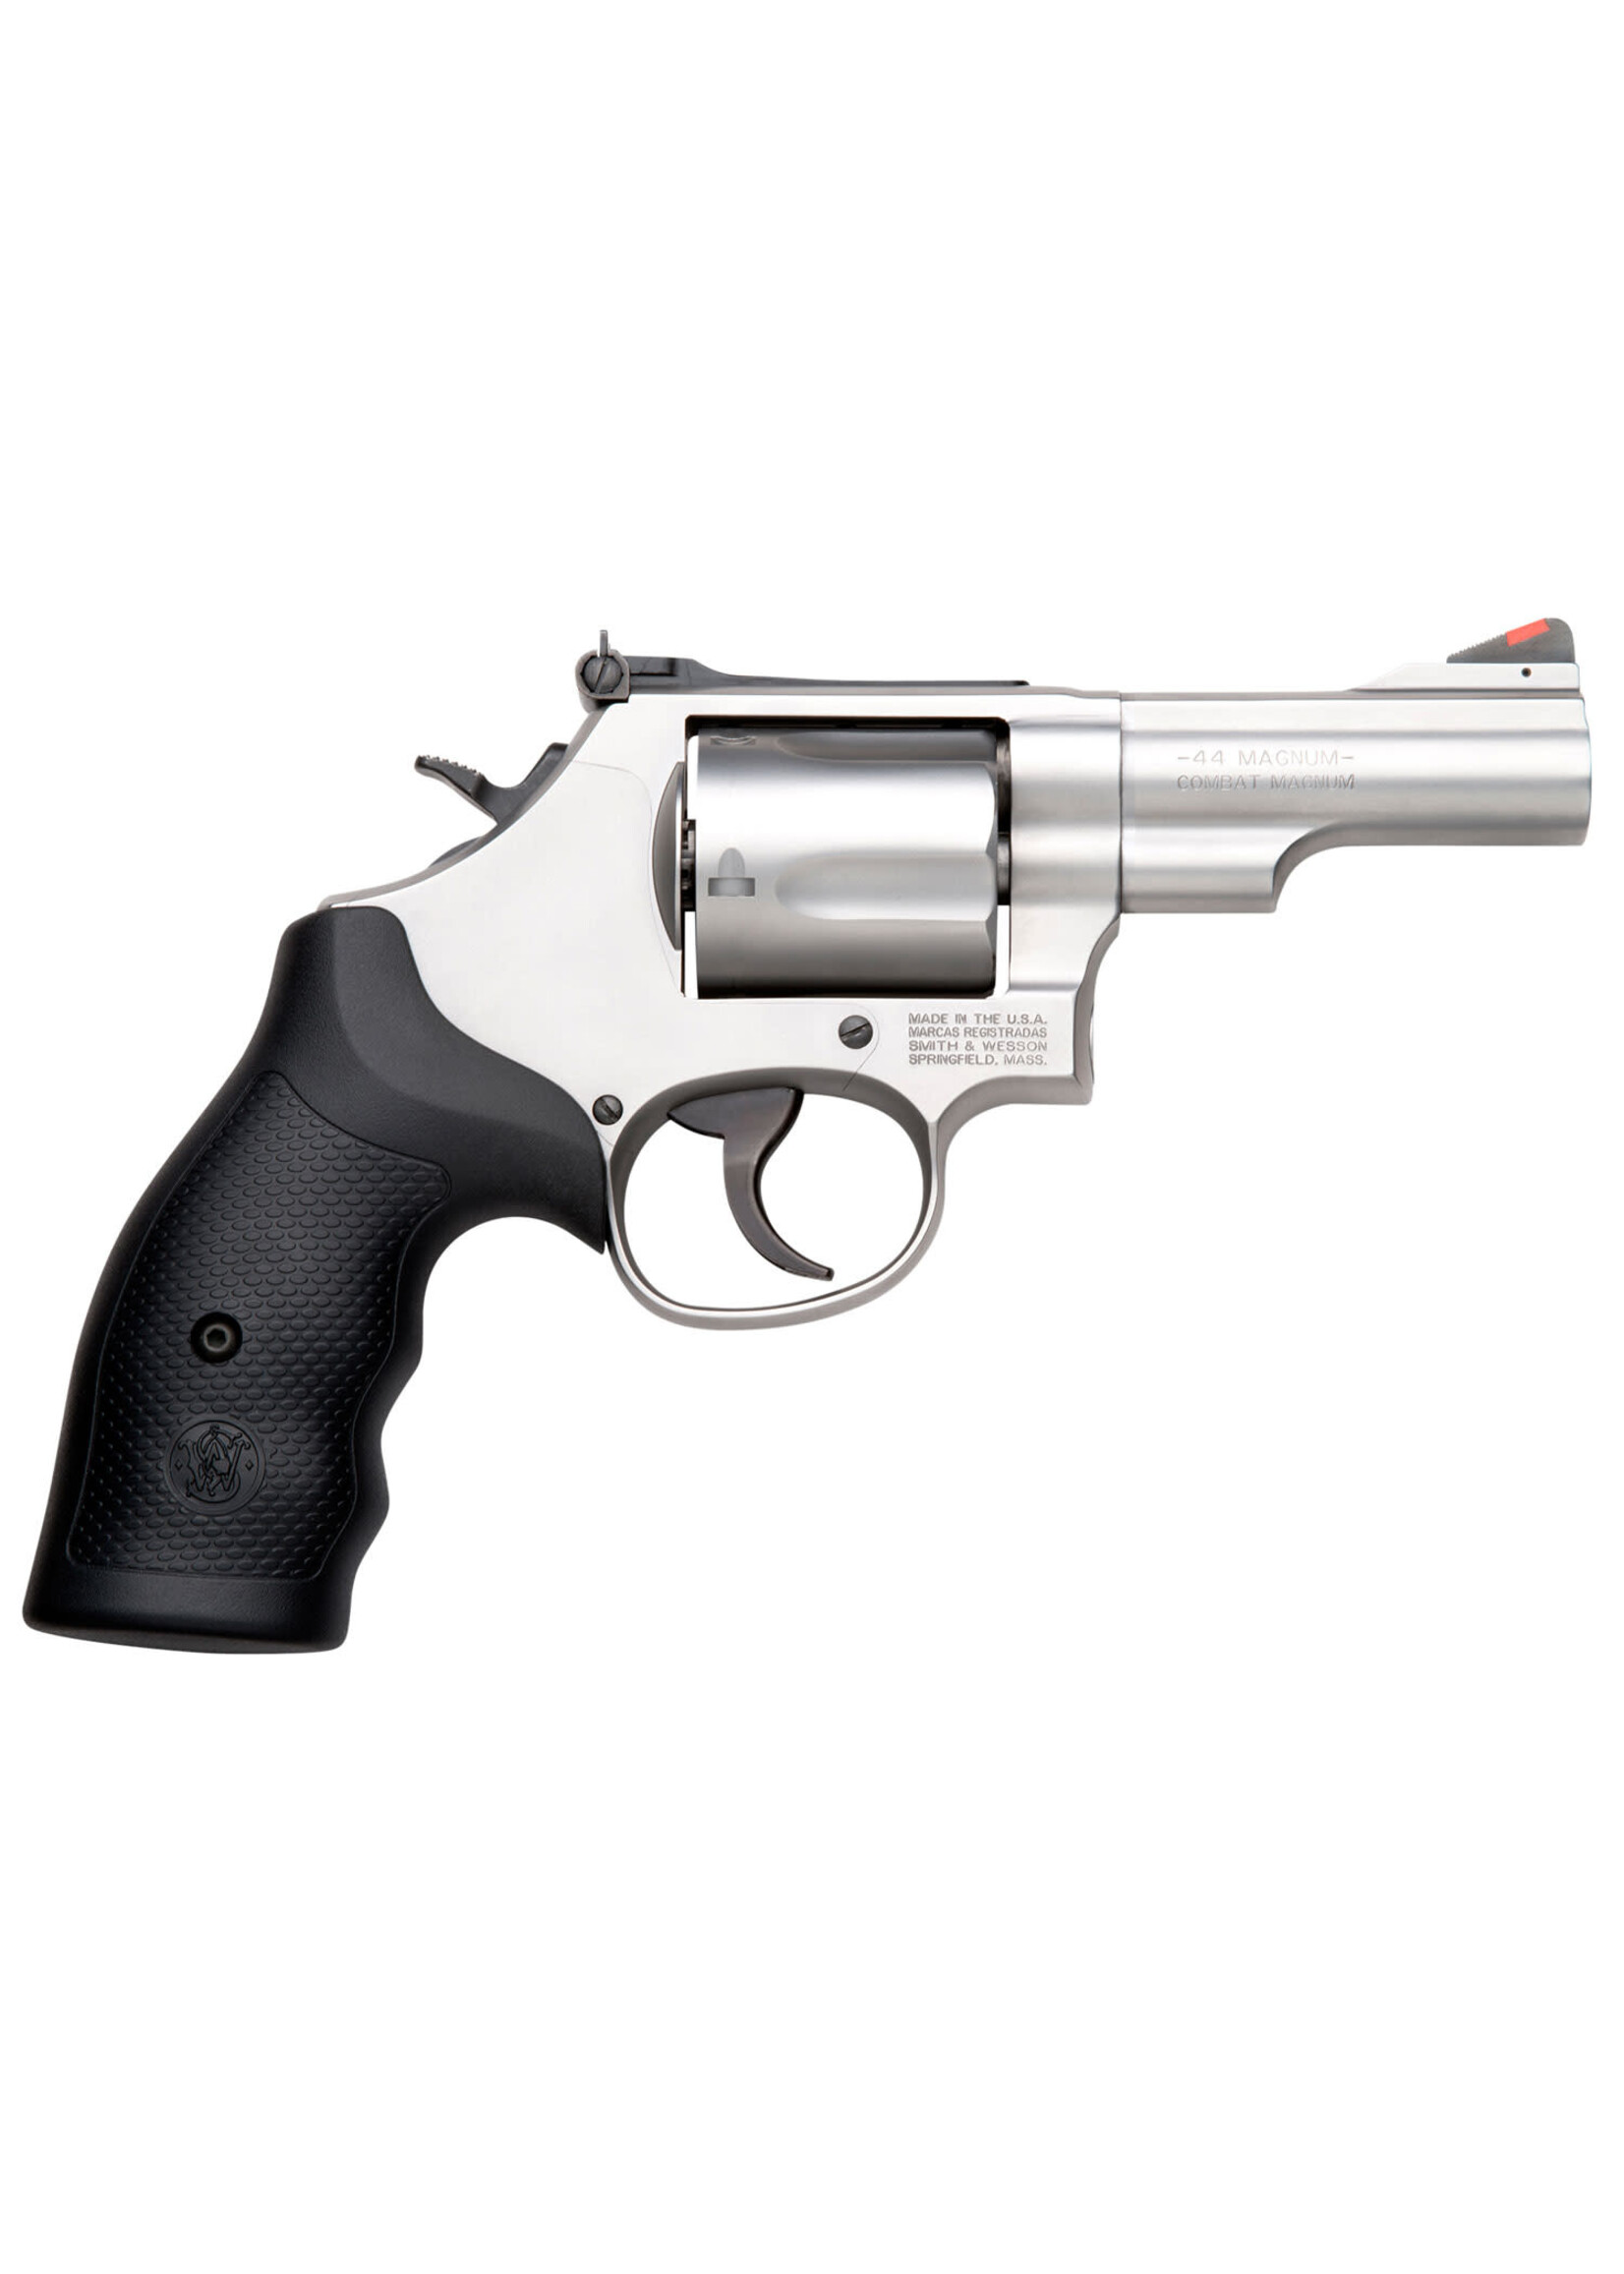 Smith and Wesson (S&W) Smith & Wesson Model 69 Combat Magnum 44 Rem Mag Stainless Steel 2.75" Barrel, 5rd Cylinder & L-Frame, Full Length Extractor Rod, Internal Lock